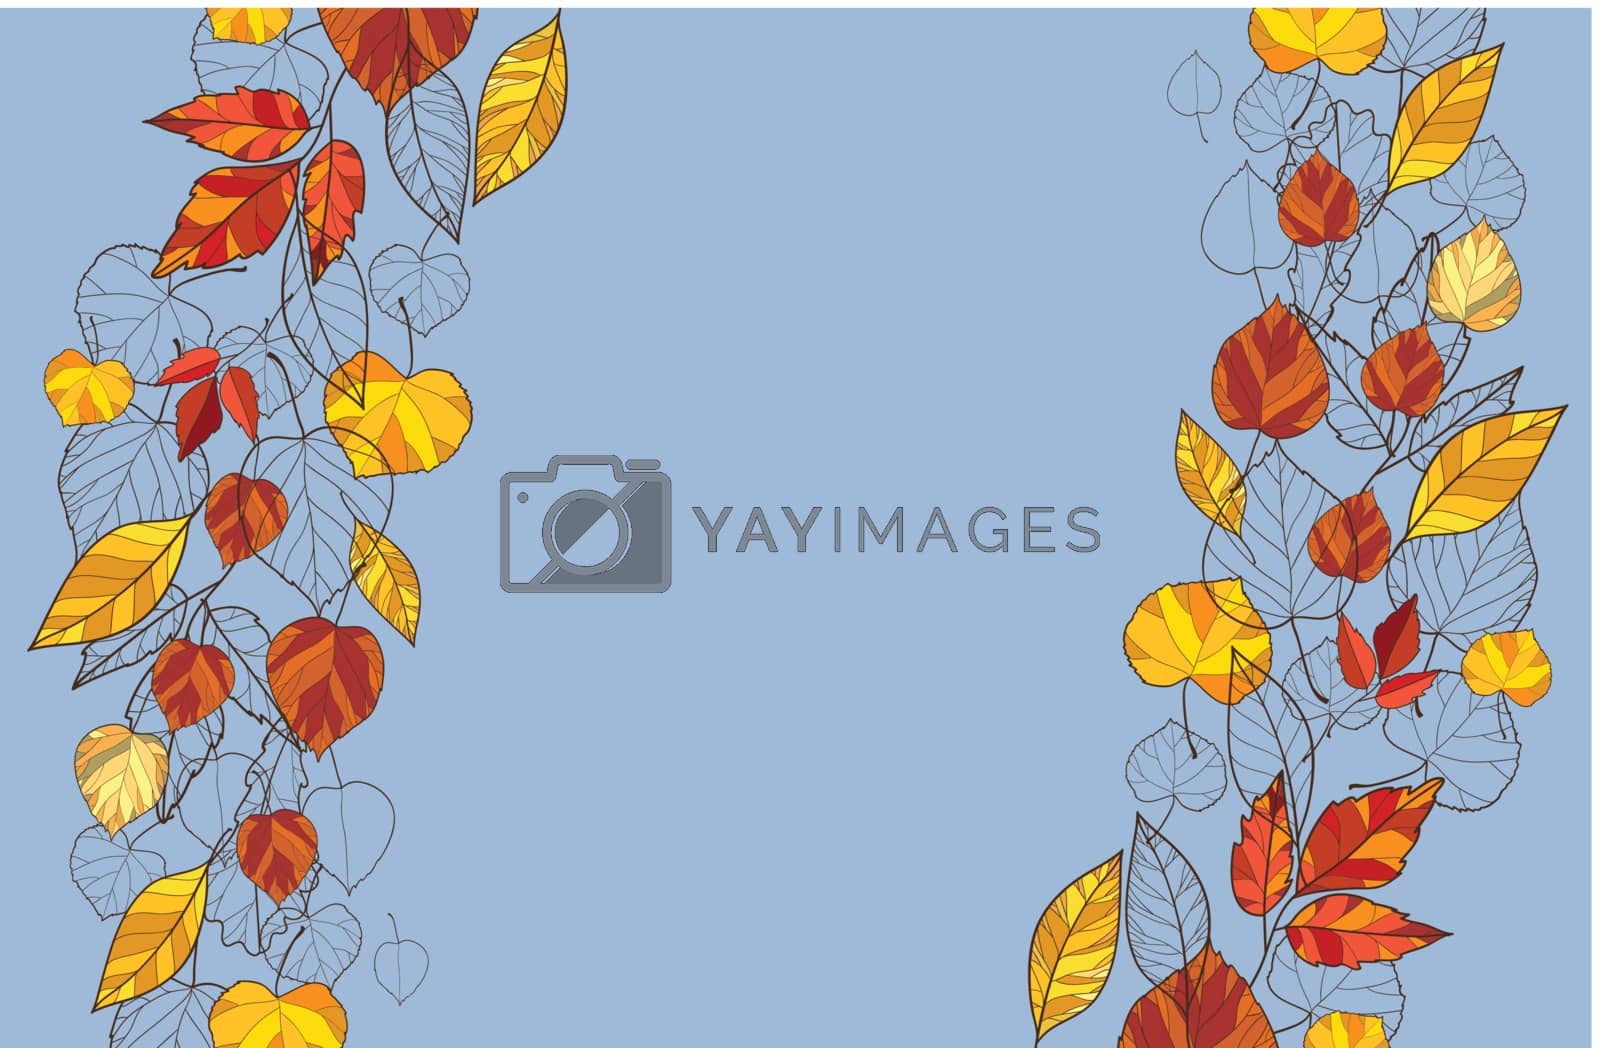 Royalty free image of  background with autumn leaves by lolya1988